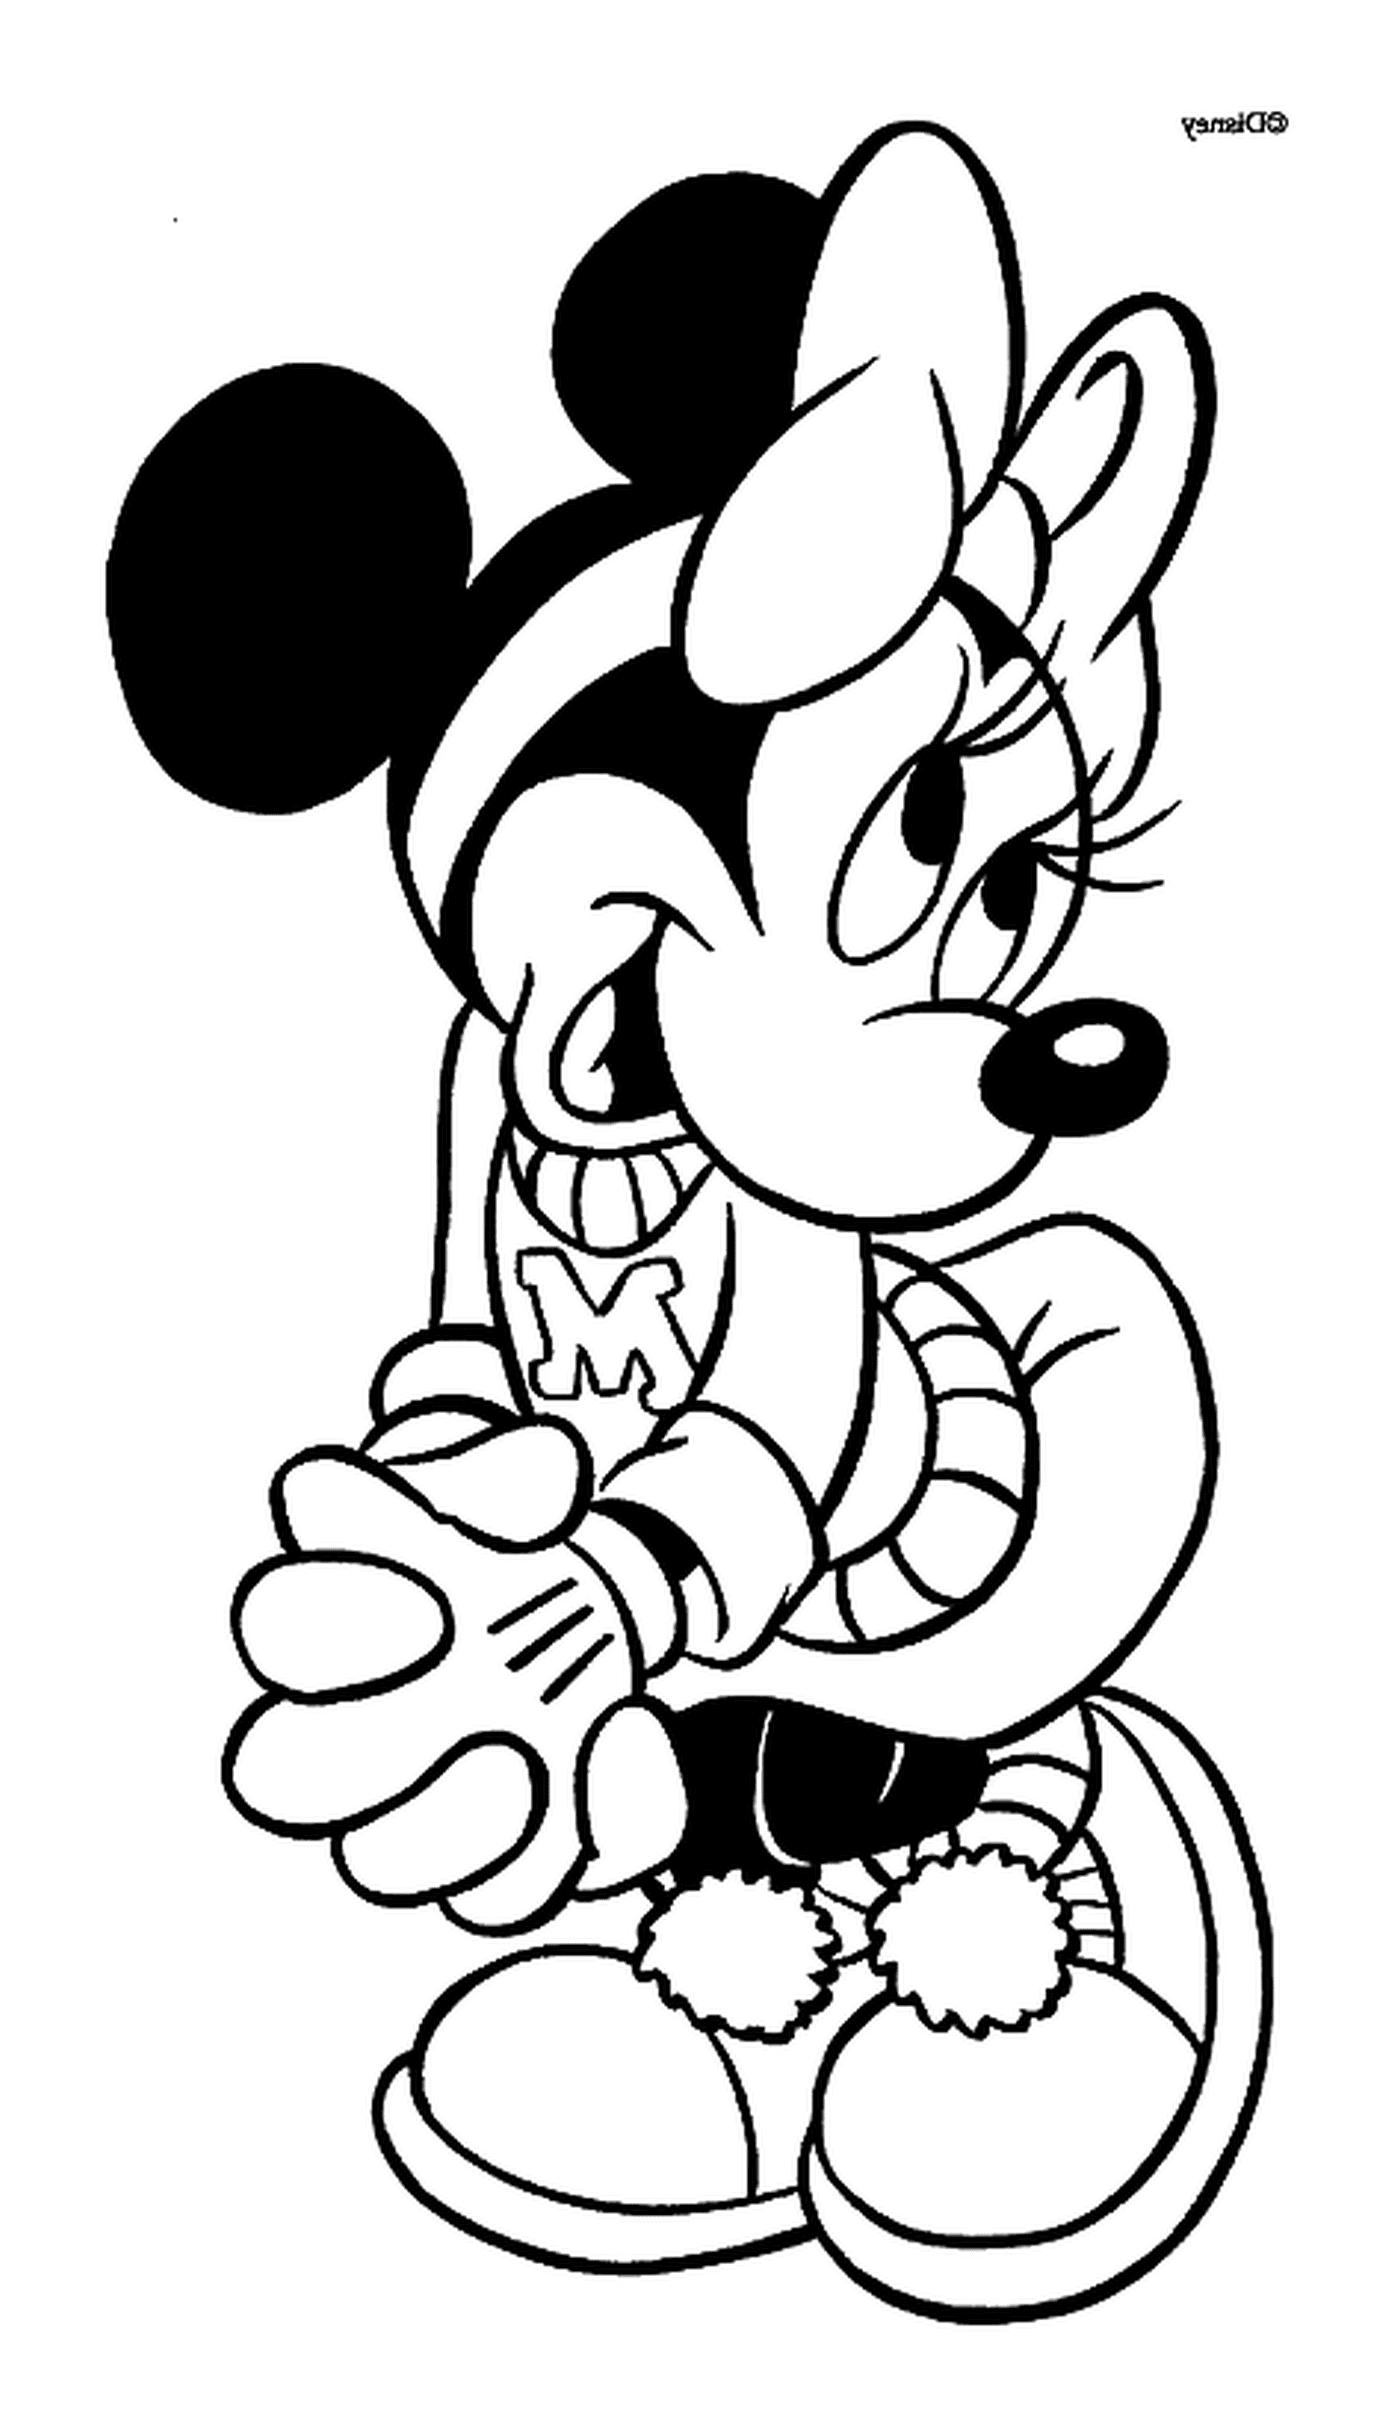  Minnie is a shy mouse 